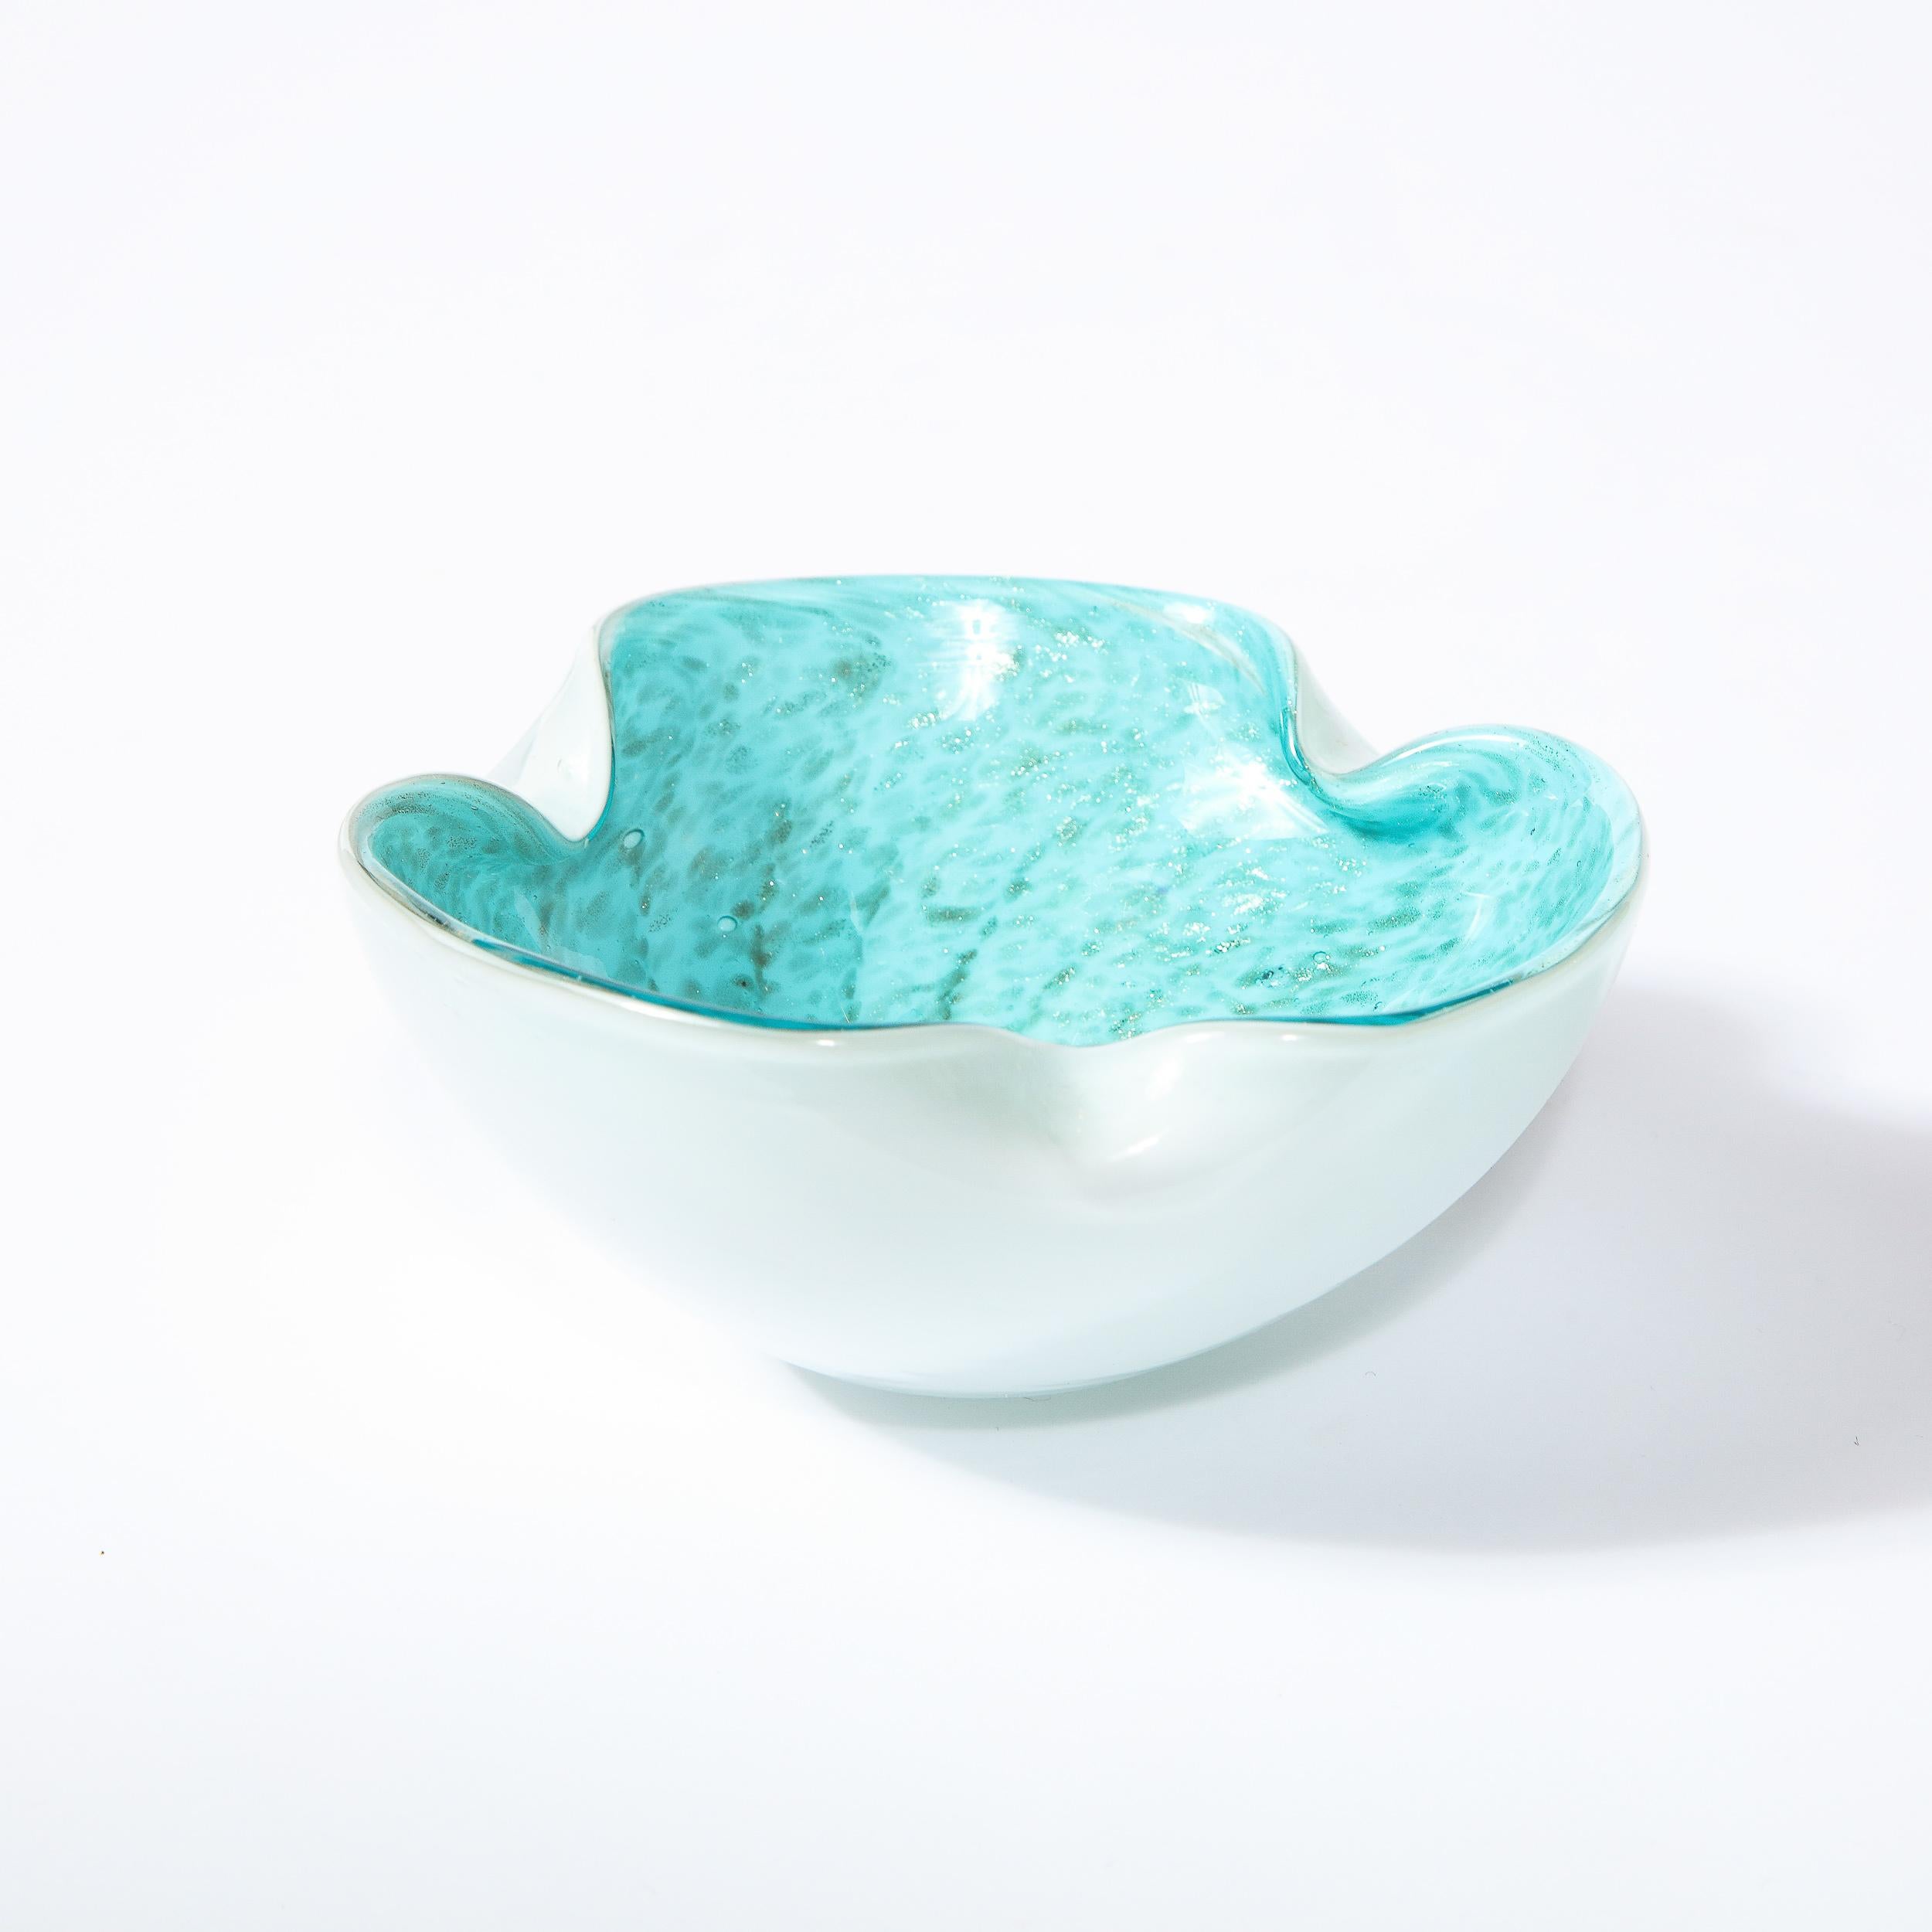 This stunning Mid-Century Modern bowl was realized in Murano, Italy- the island off the coast of Venice renowned for centuries for its superlative glass production. It features a circular form with raised sides and scallooped detailing. The bowl has